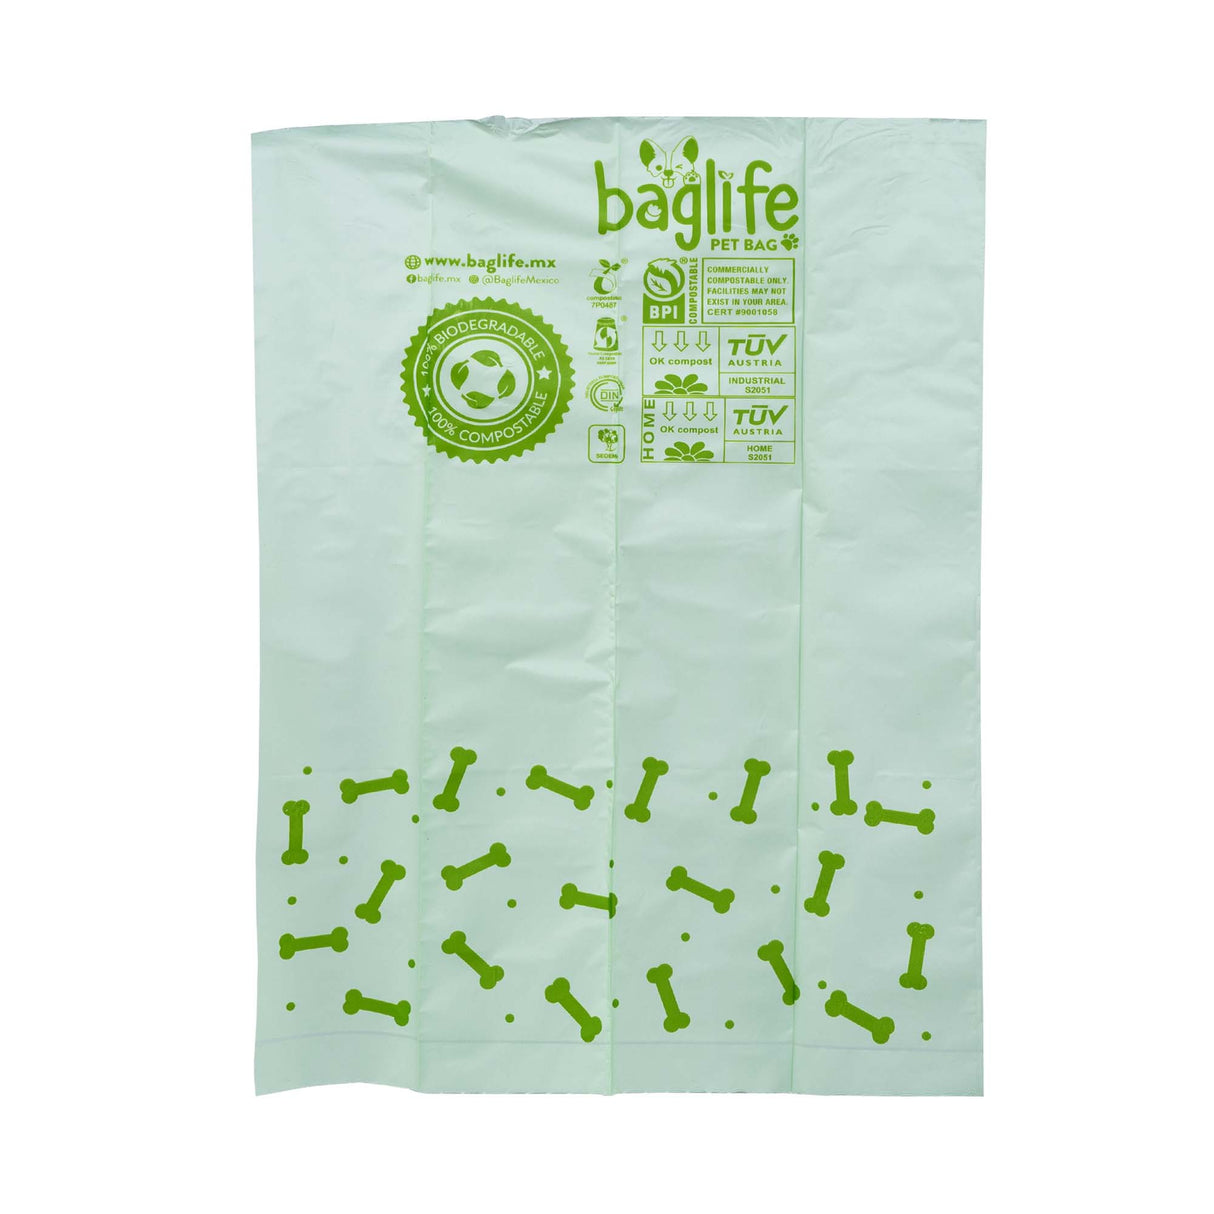 BAGLIFE PUPPY BOX 8 ROLLS WITH 120 BAGS